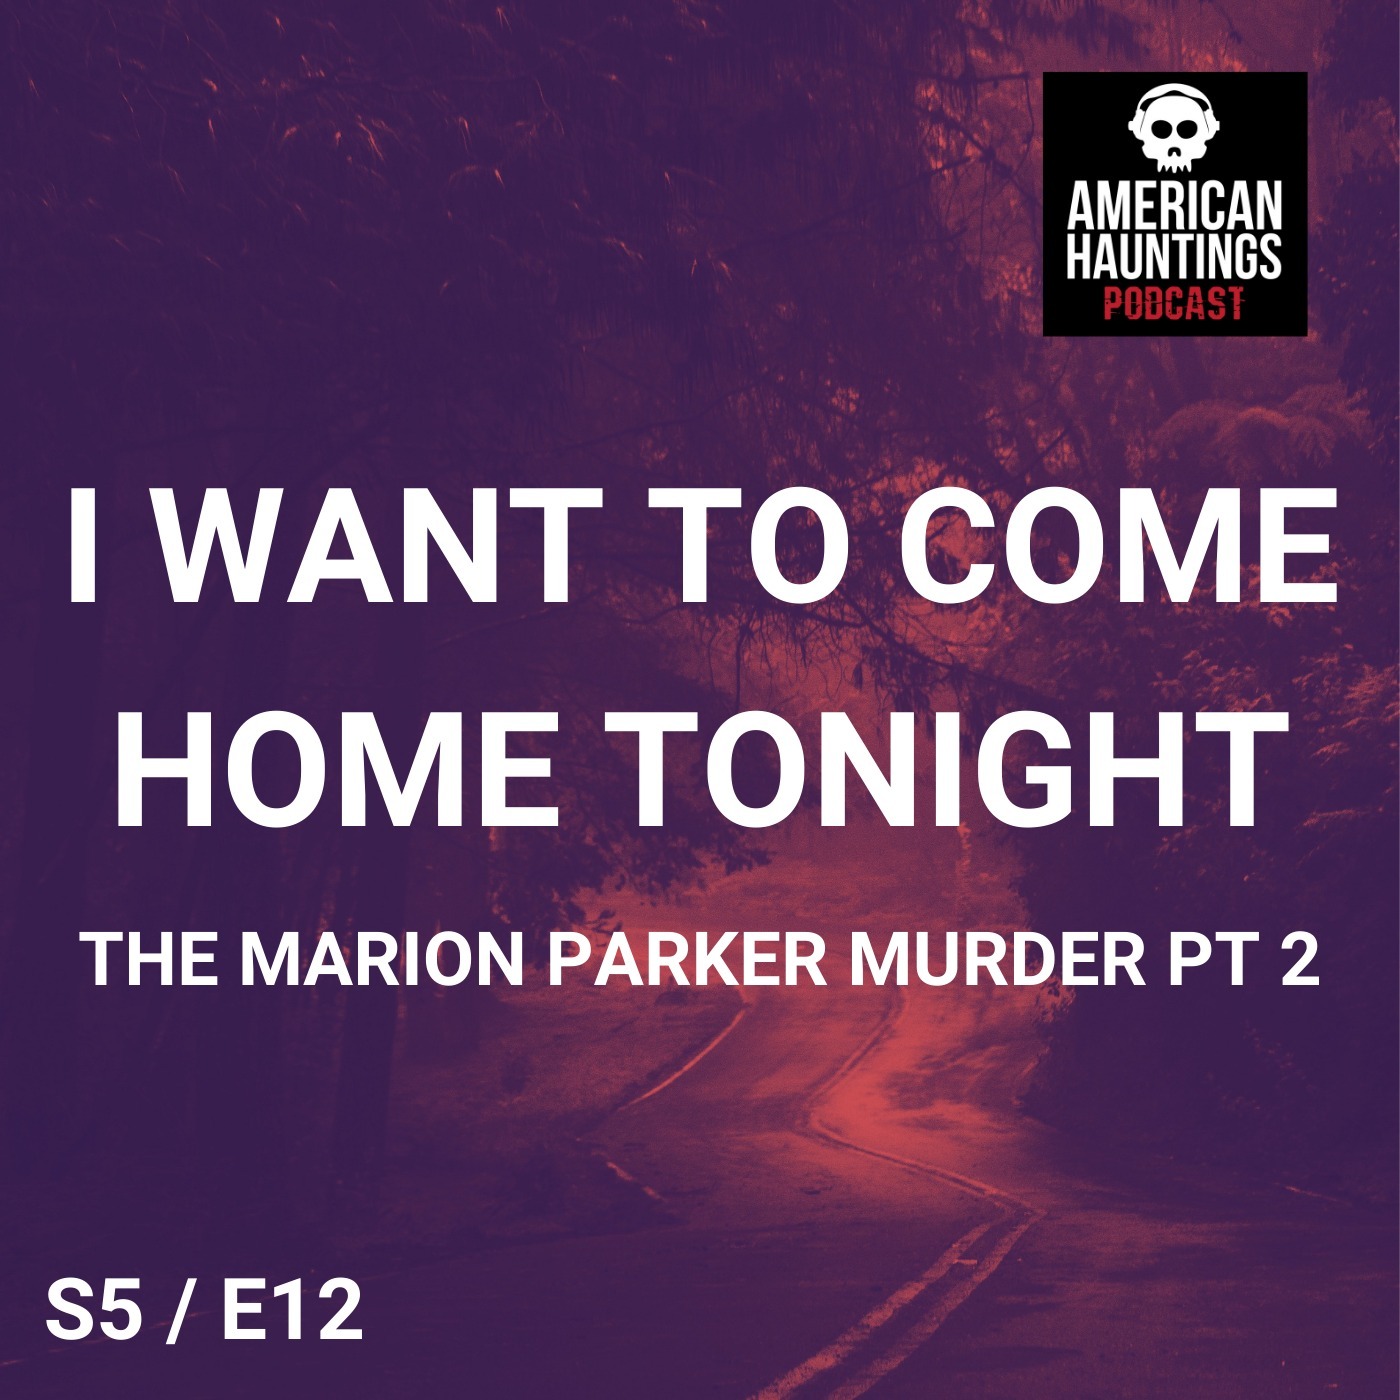 The Marion Parker Murder pt 2 (I Want To Come Home Tonight)